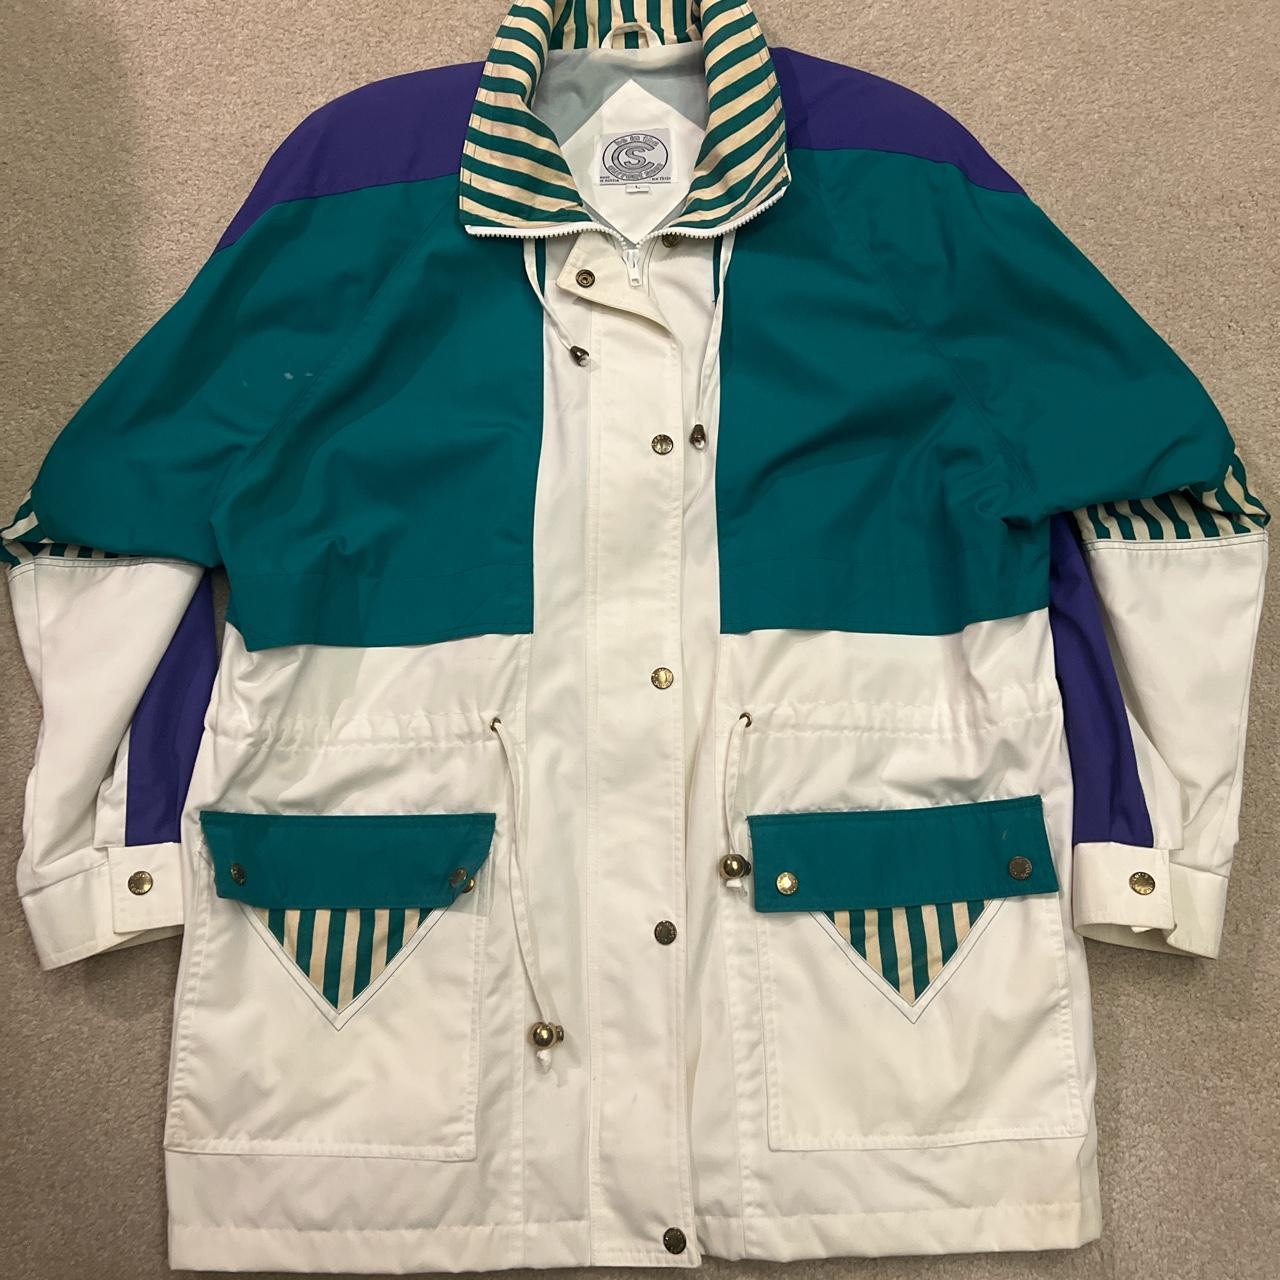 Current Seen Women's White and Purple Jacket (3)